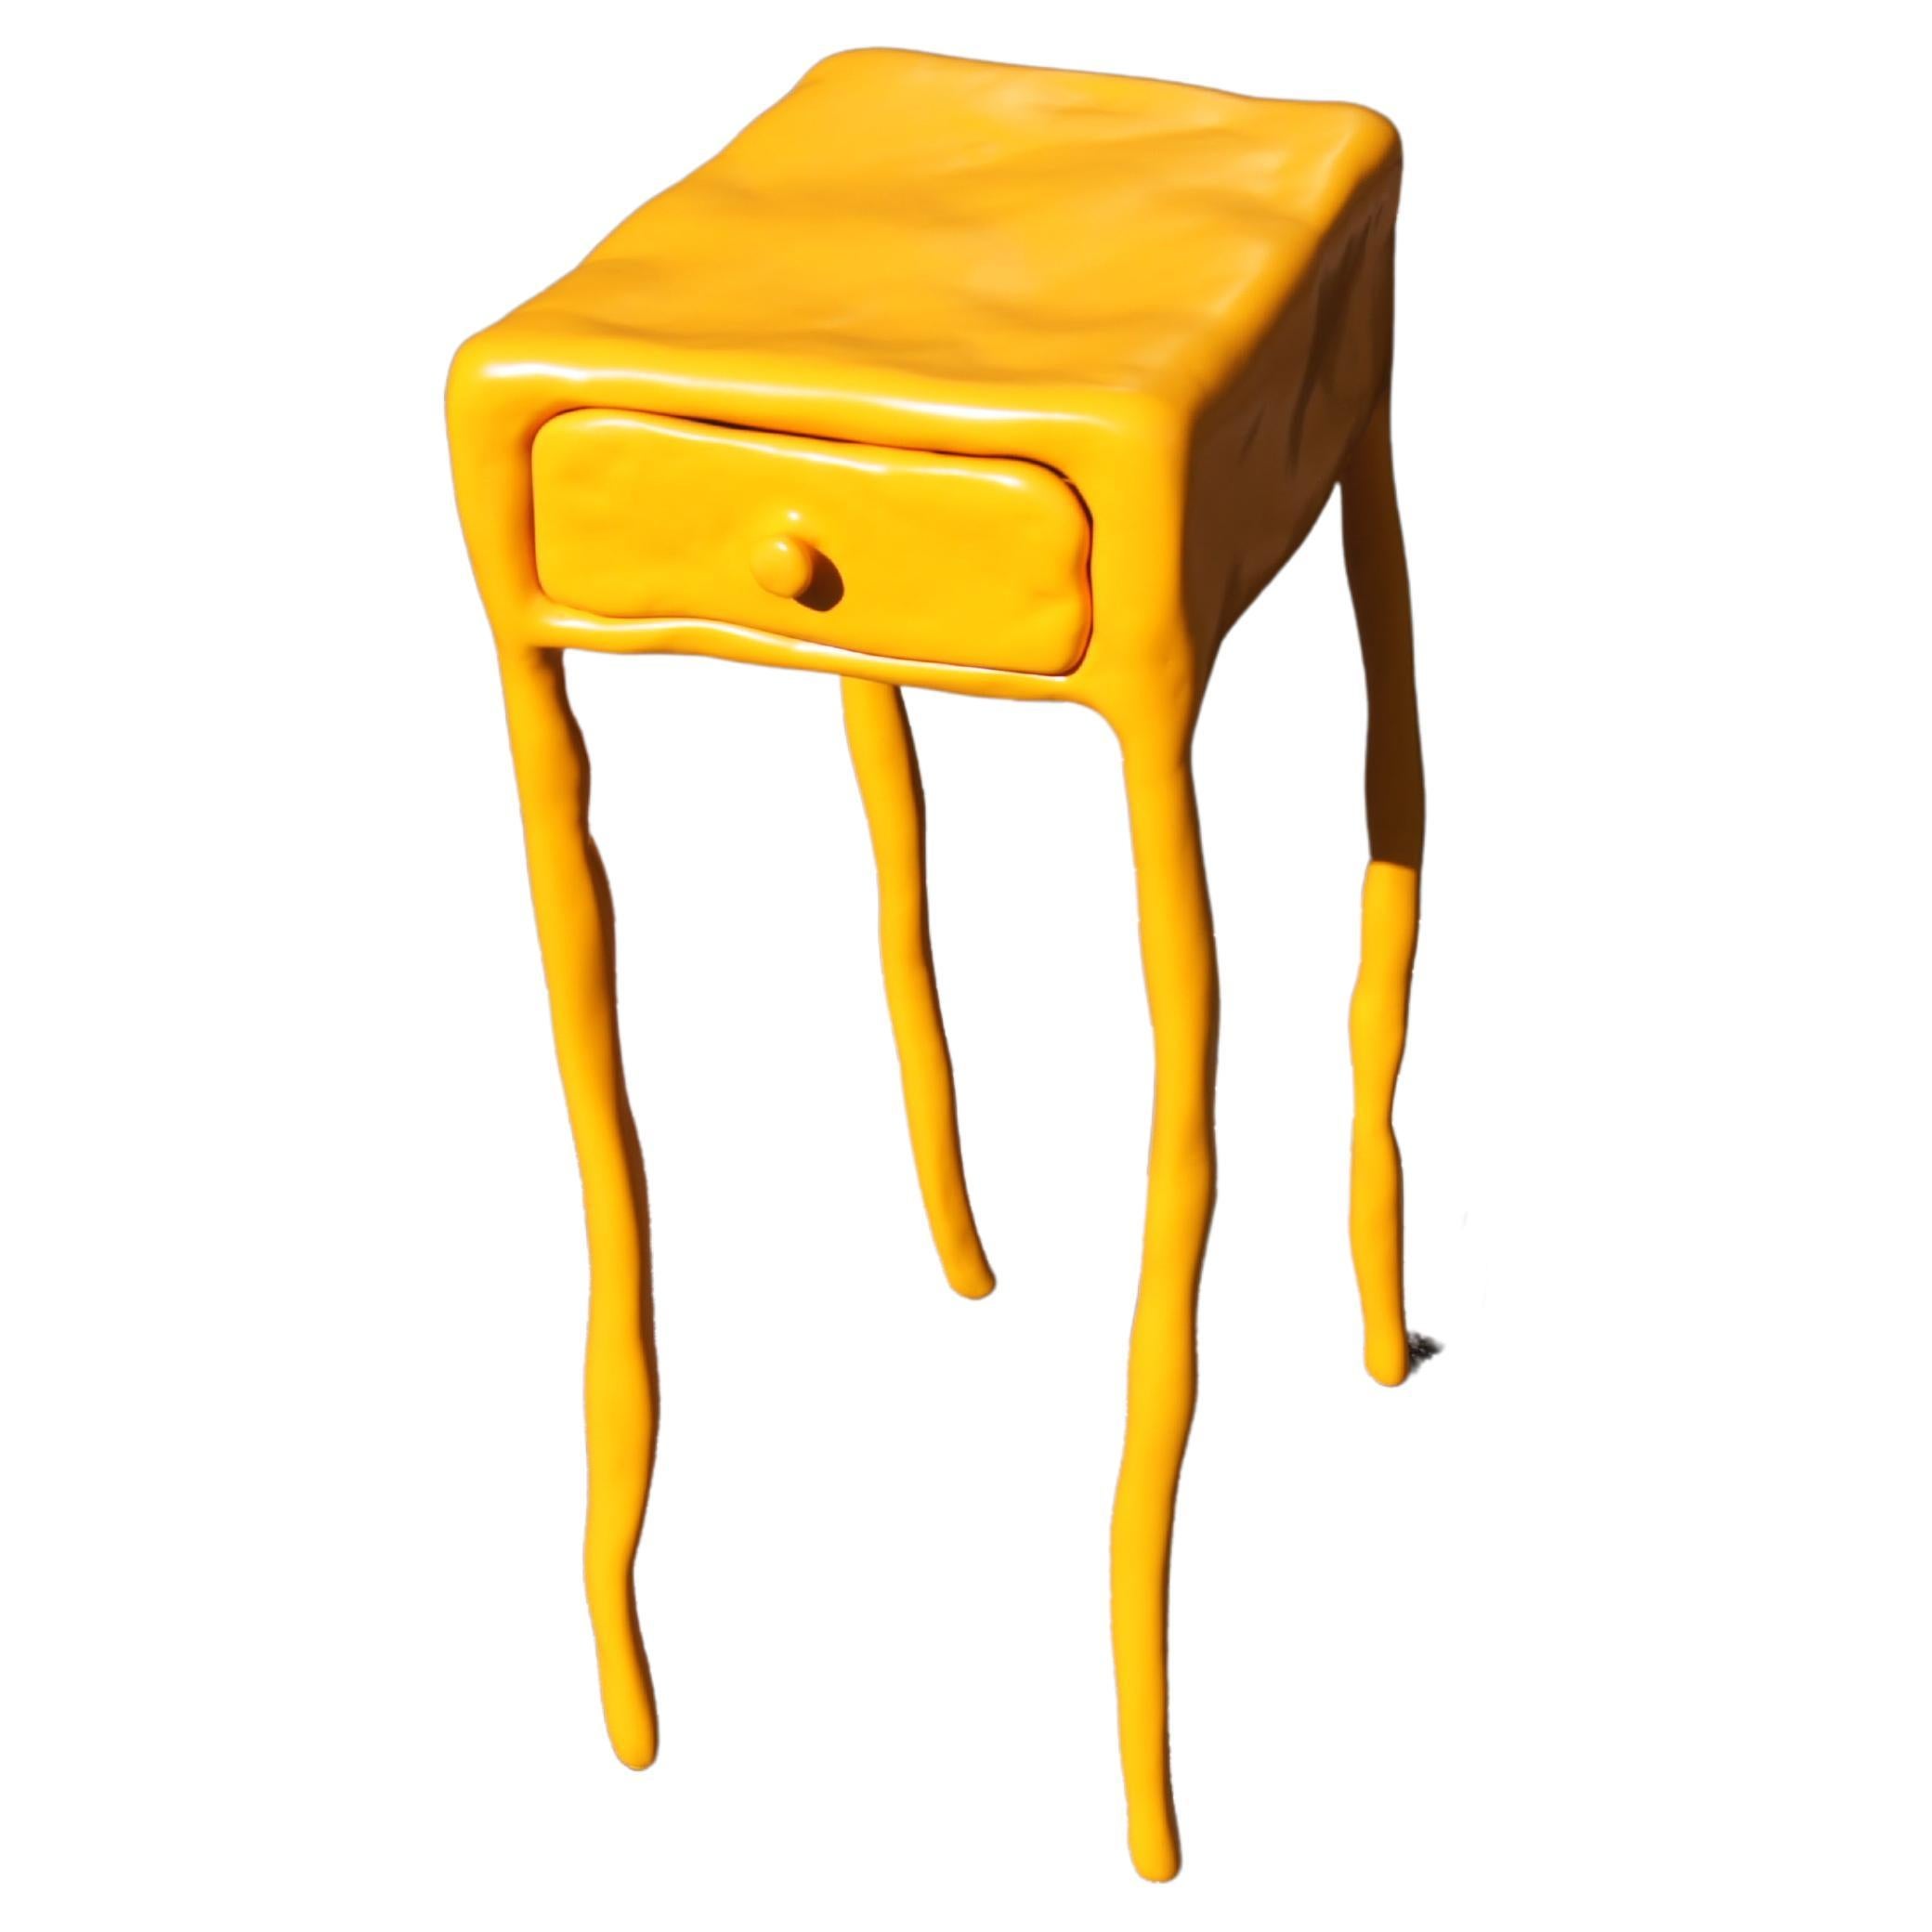 Yellow-Orange Clay Collection Side Table with Drawer by Maarten Baas